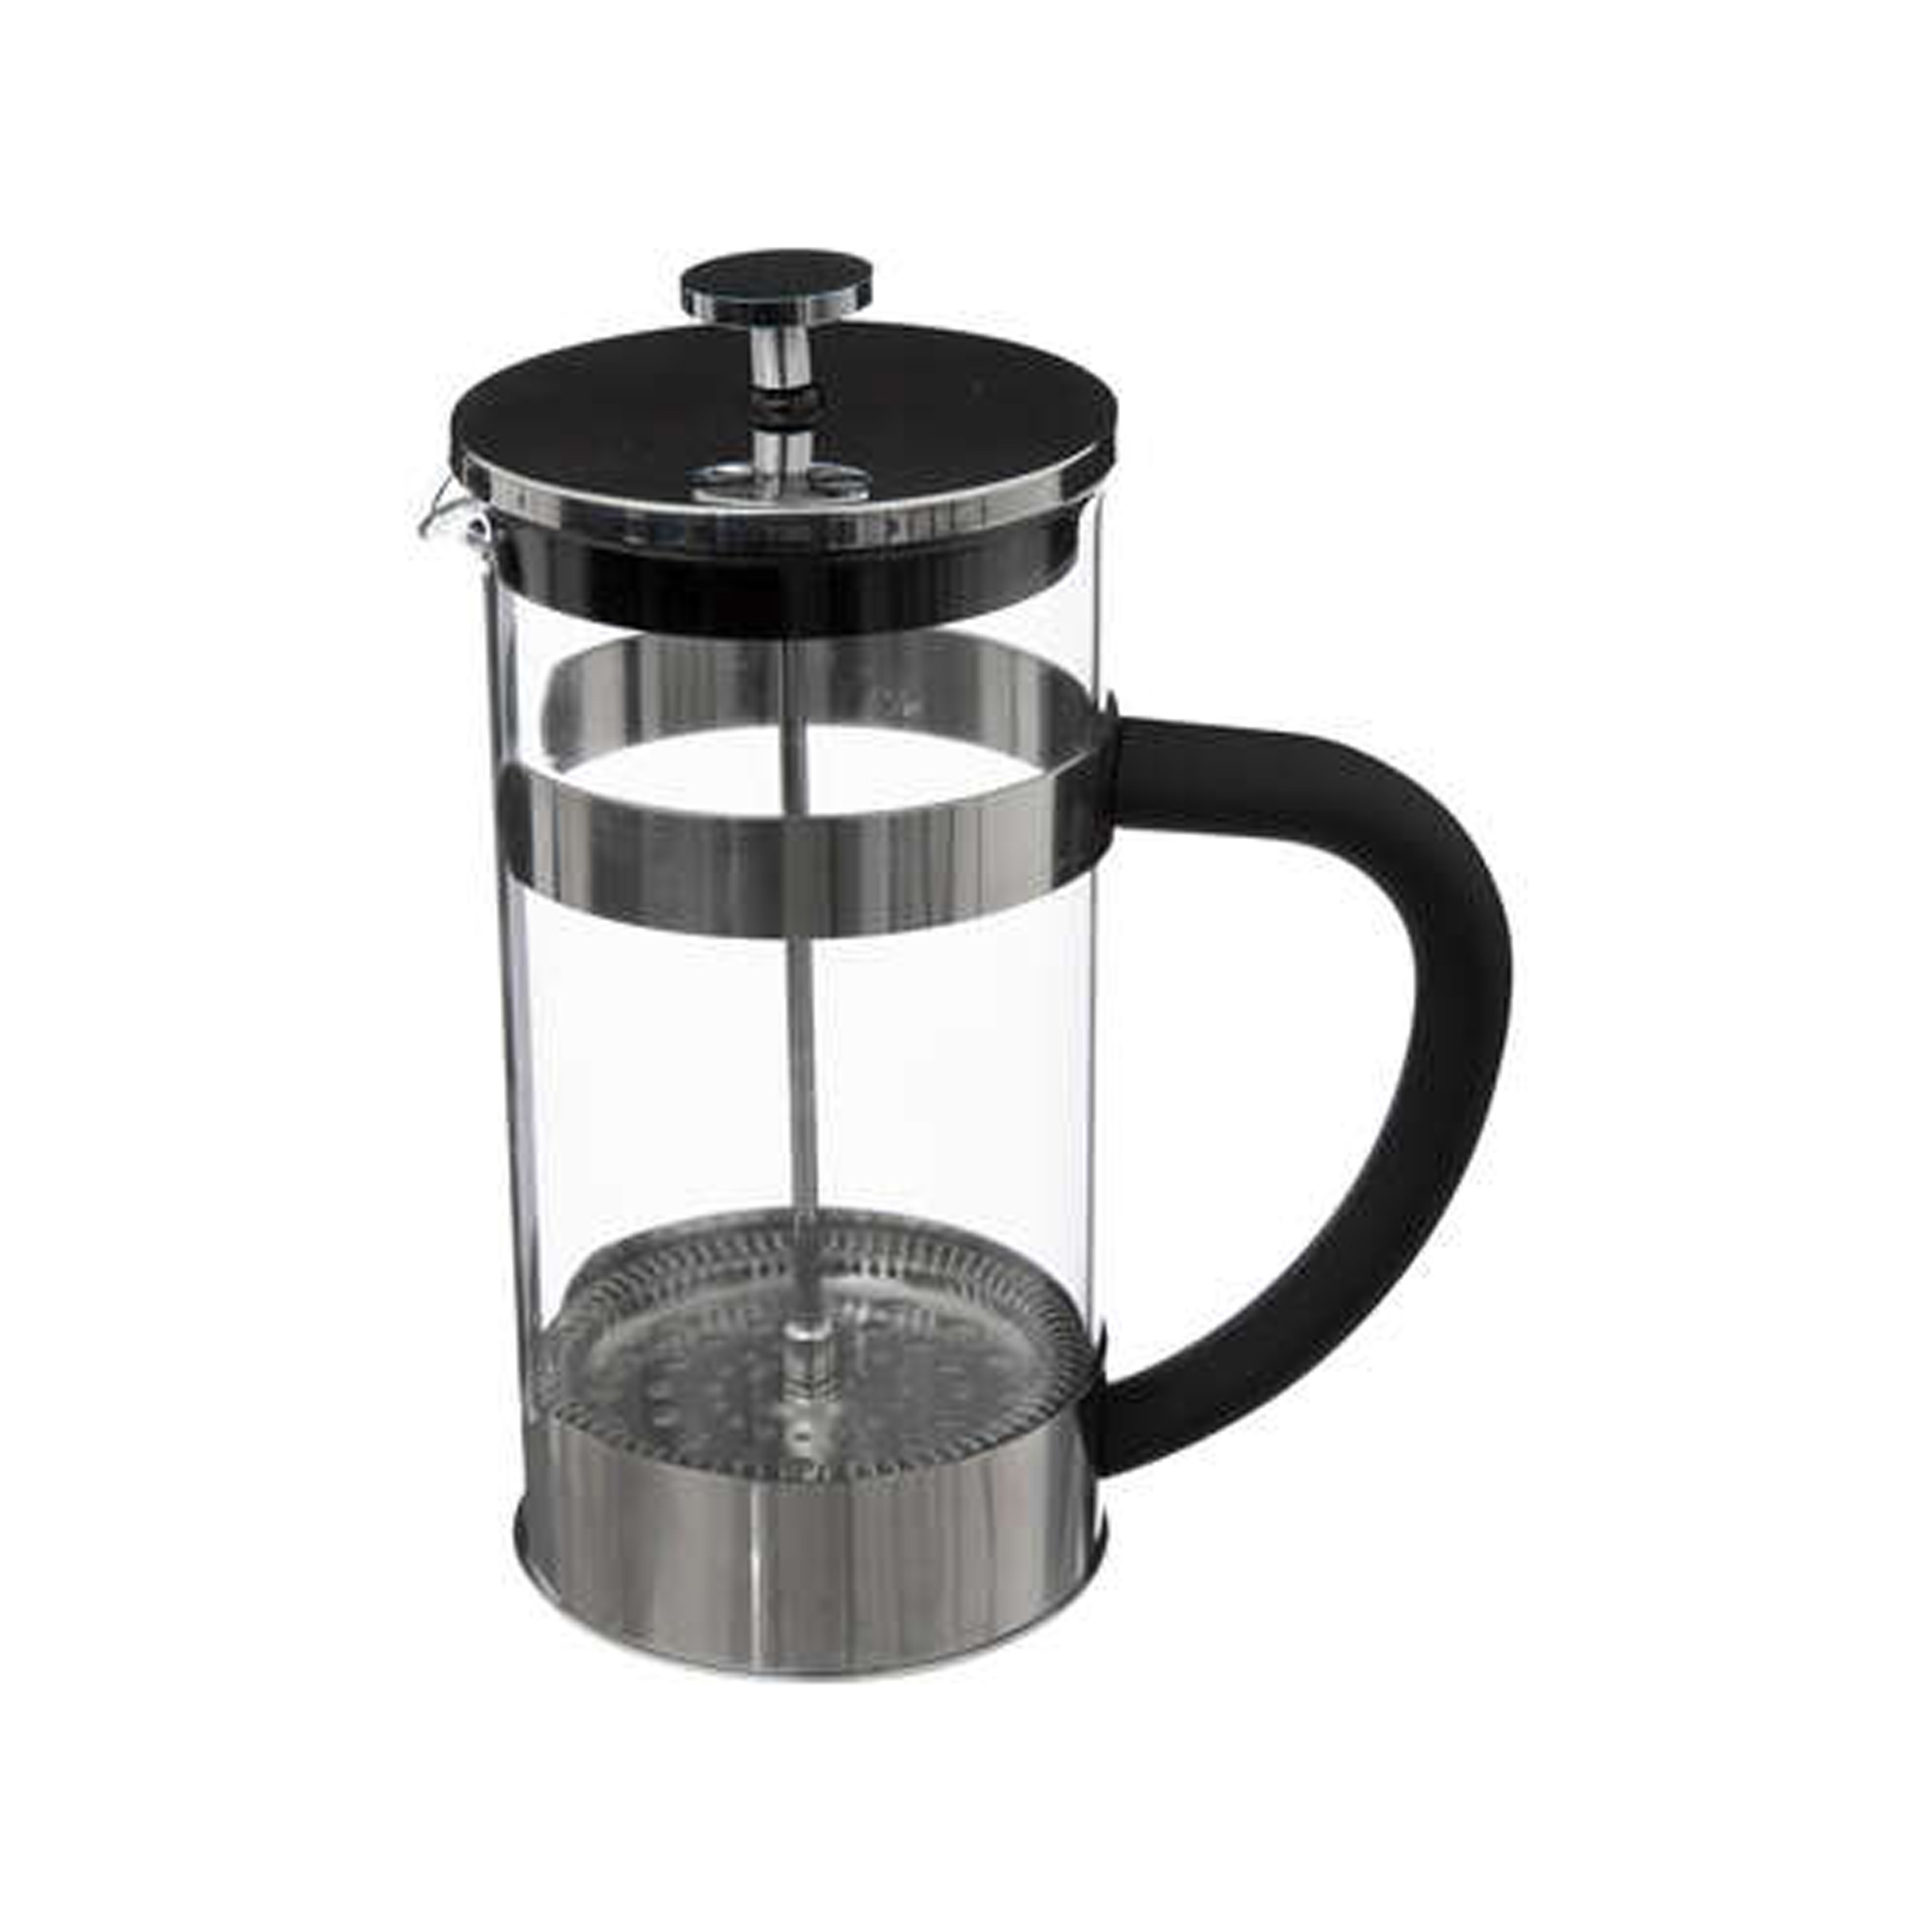 5Five Cafetiere French Press koffiezetter koffiemaker pers 1000 ml glas-rvs